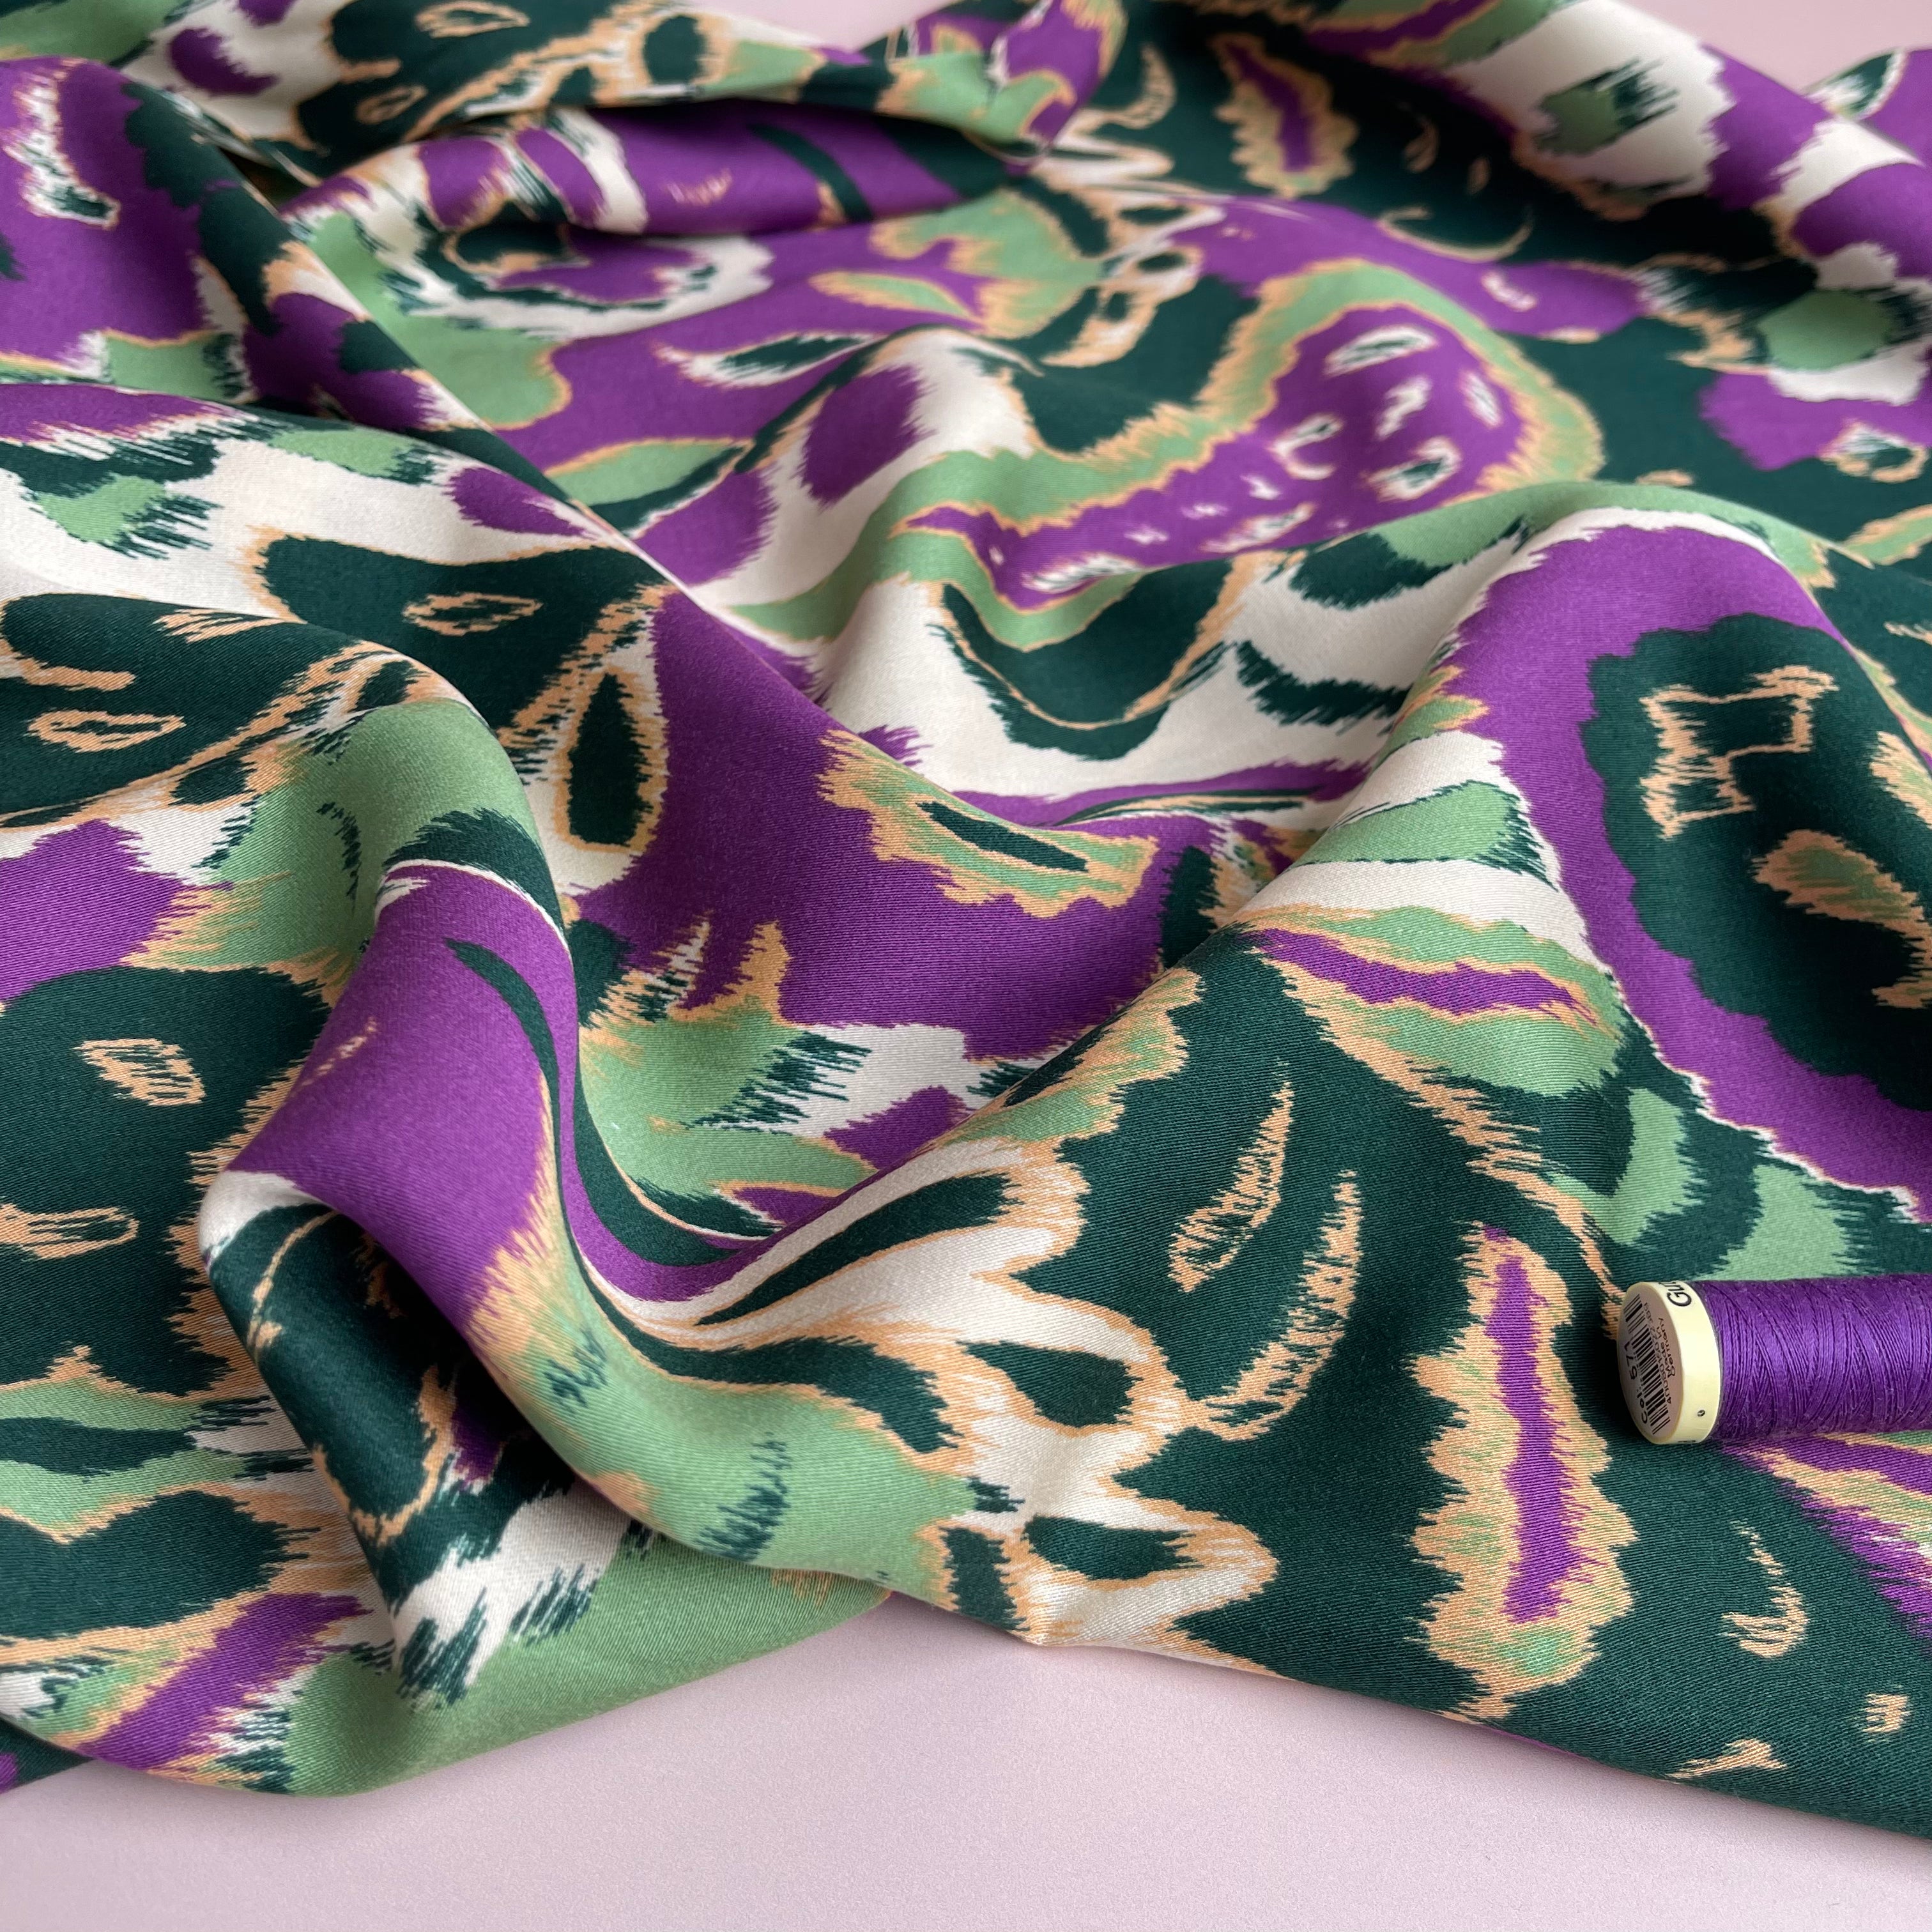 REMNANT 0.65 Metres - Hazy Paisley Purple and Green Viscose Sateen Fabric